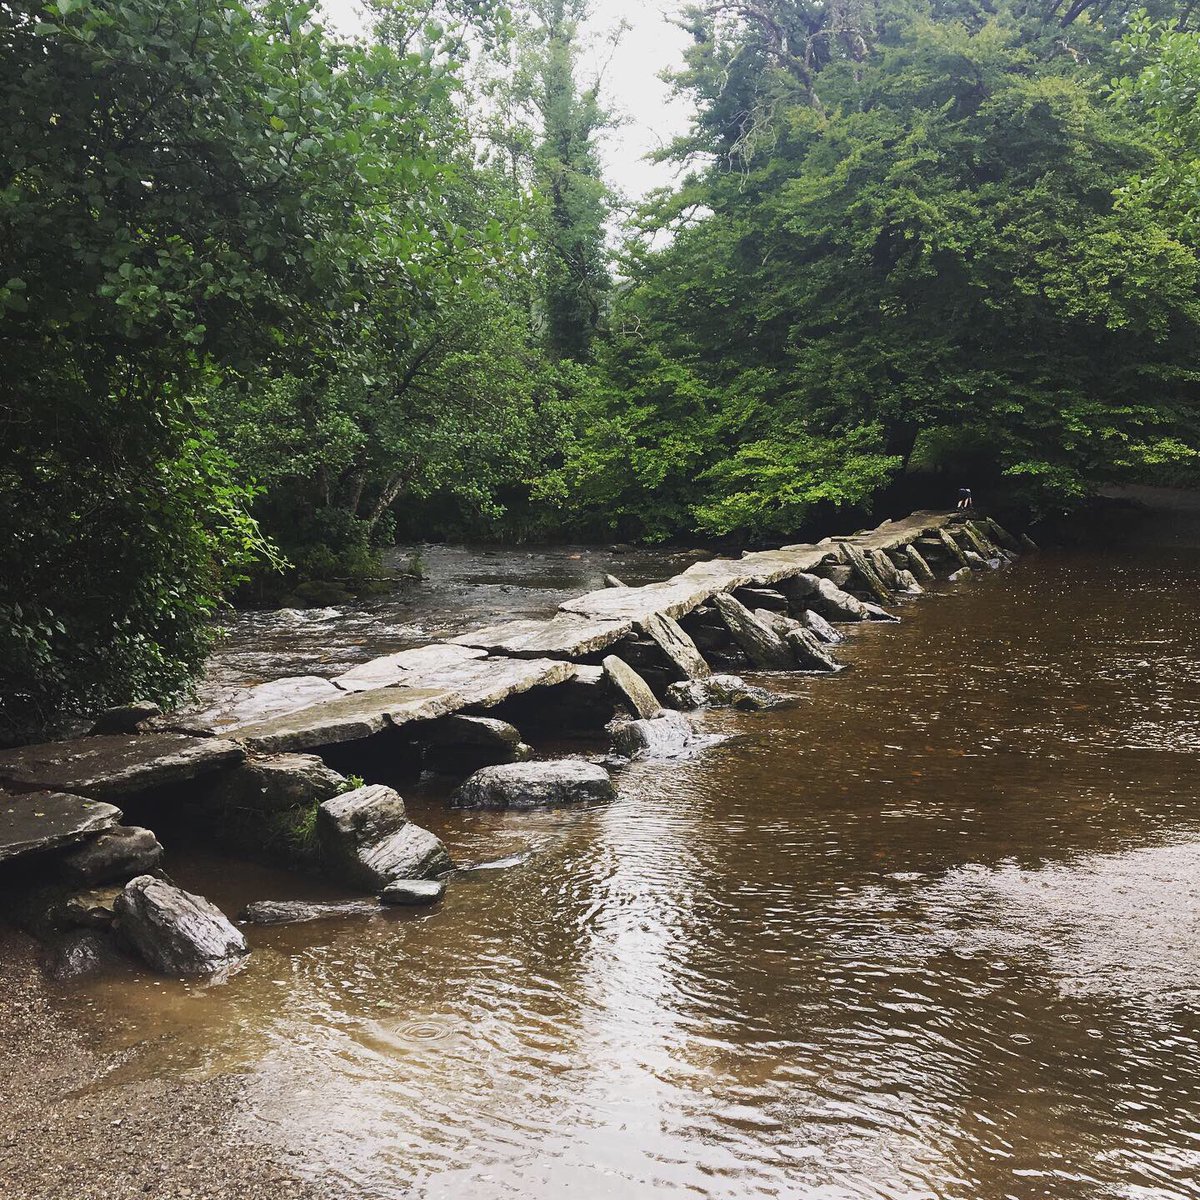 The Tarr steps at Exmoor National Park is a great place for a picnic or pub lunch & then a stroll or paddle in the river Barle. You may even see some Exmoor ponies on your travels!
#exmoor #devon #picnic #publunch #luxurycamping #glampinglife #glamping #luxuryglamping